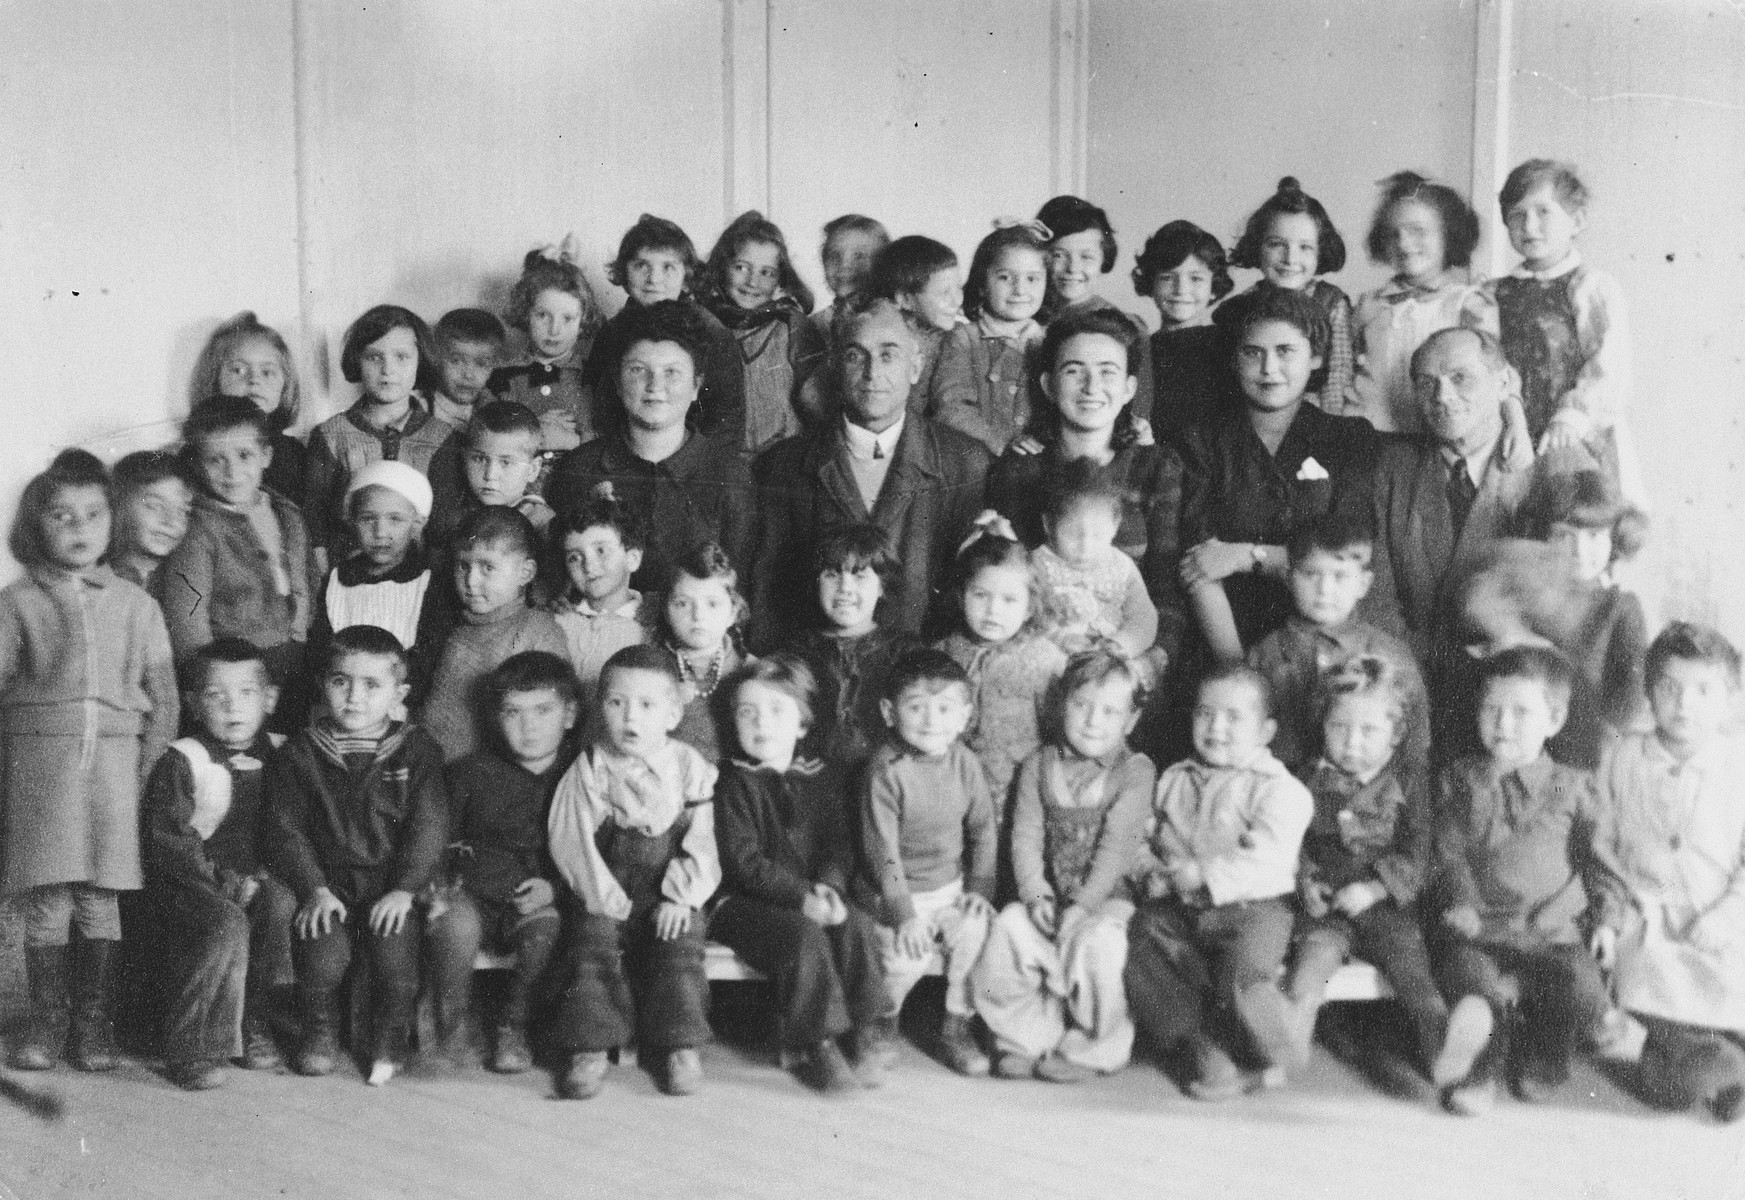 Teachers and young children in the elementary school in the Ainring displaced persons camp.

Among those pictured is the teacher, Sara Michlowitz (Muschel), center row, third from the right.  Also pictured is Rachel Yudkowitz (seventh child standing from the left , wearing a bow in her hair).